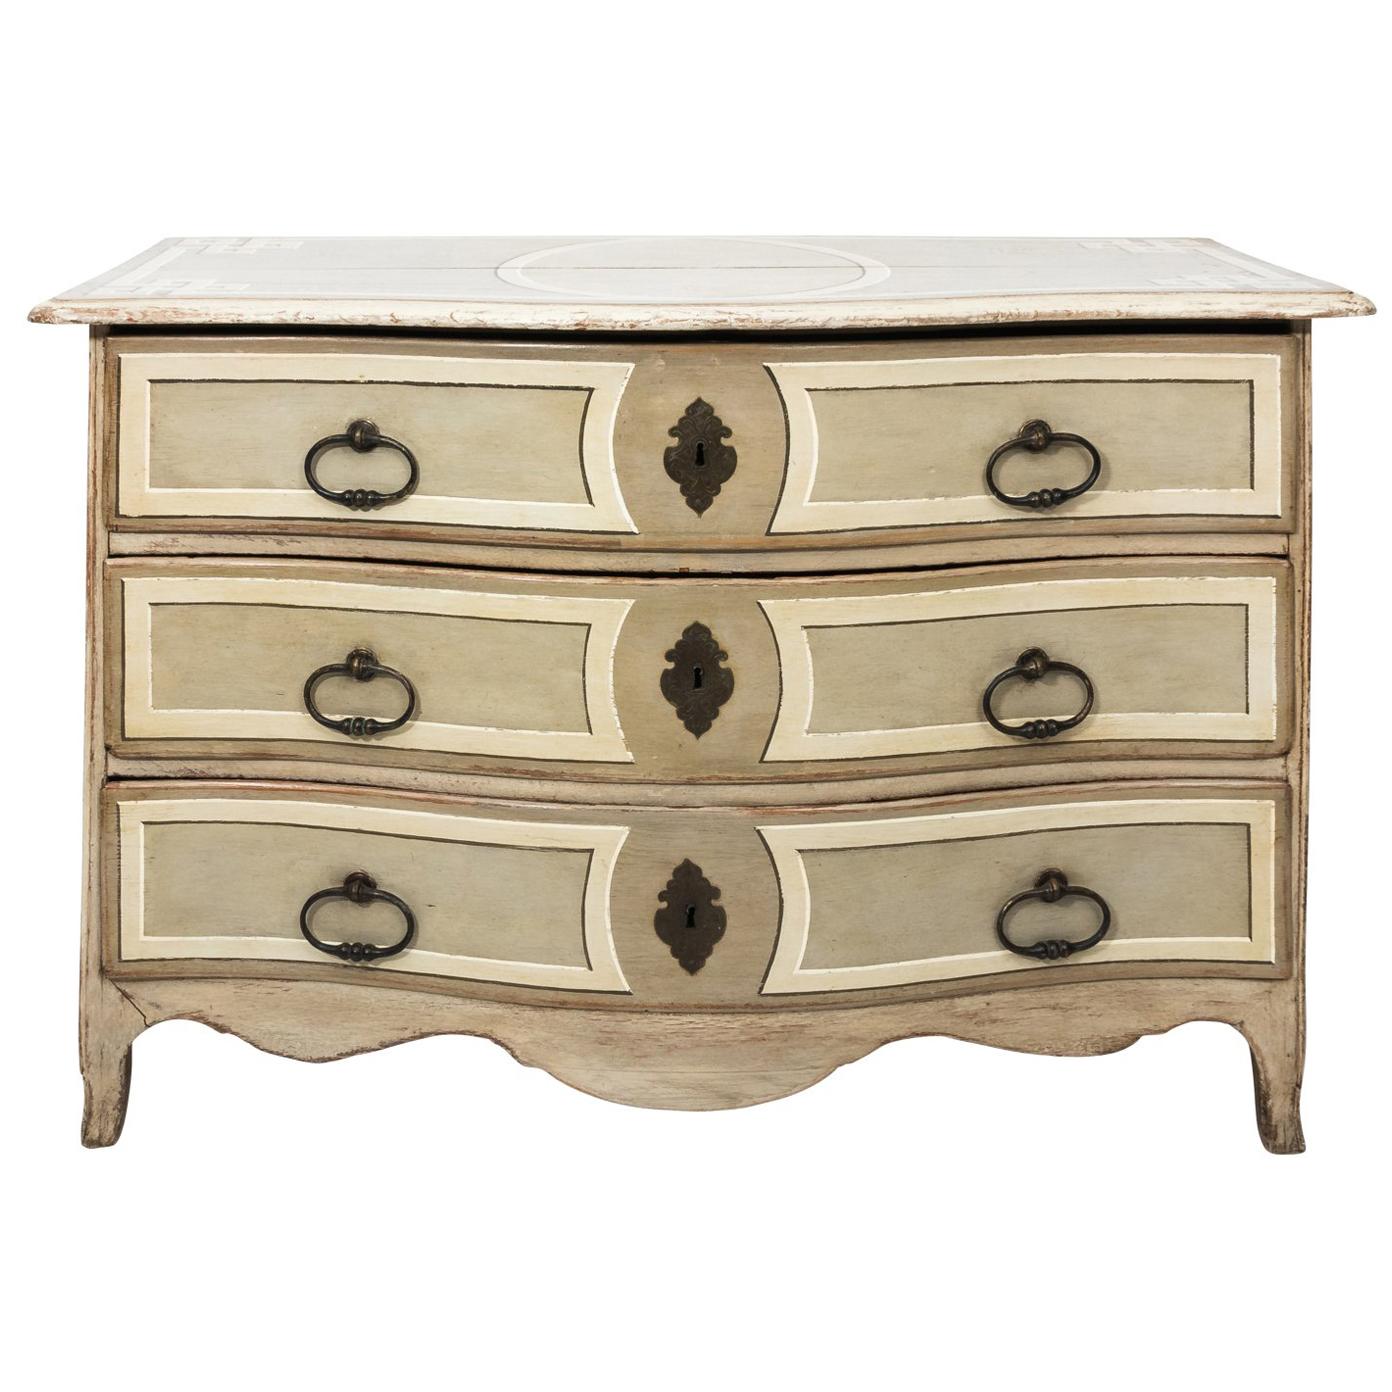 19th Century Painted Serpentine French Chest of Drawers